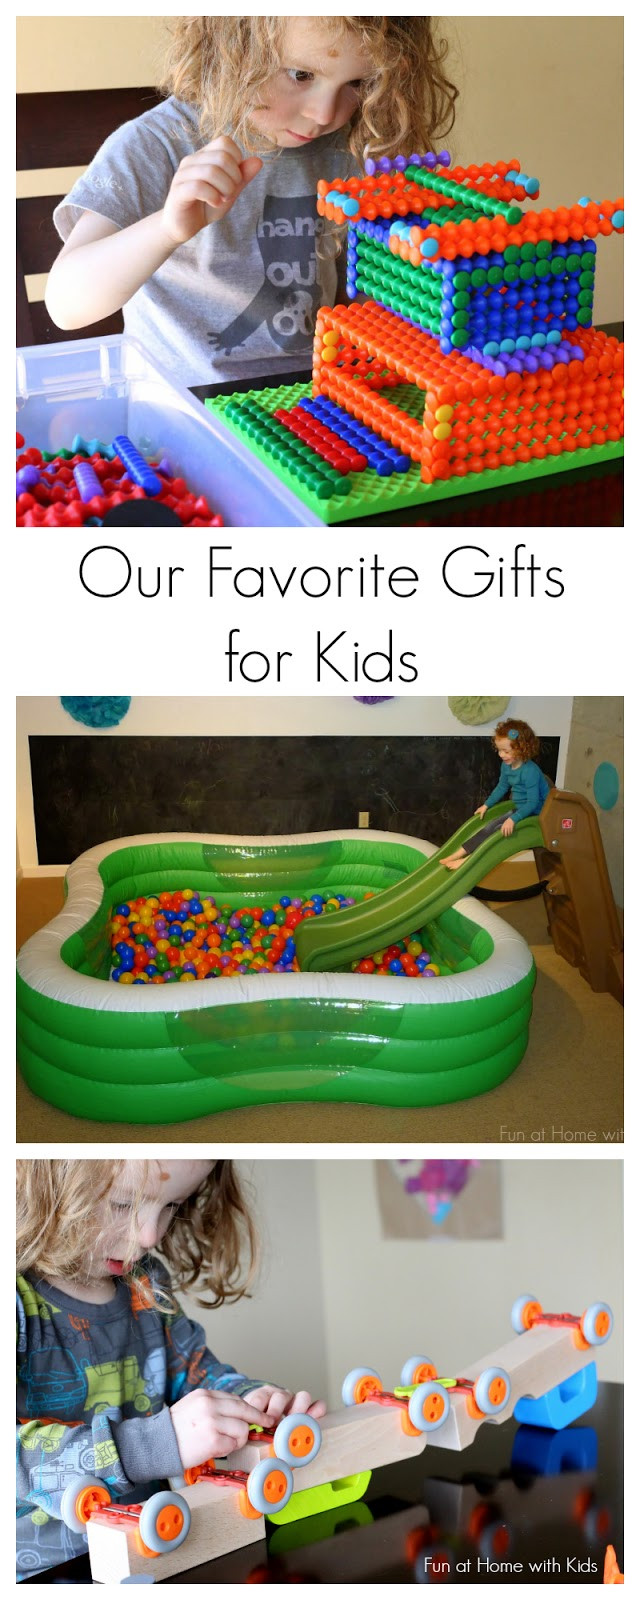 Cool Birthday Gifts For Kids
 Our 10 Best and Favorite Gift Ideas for Kids